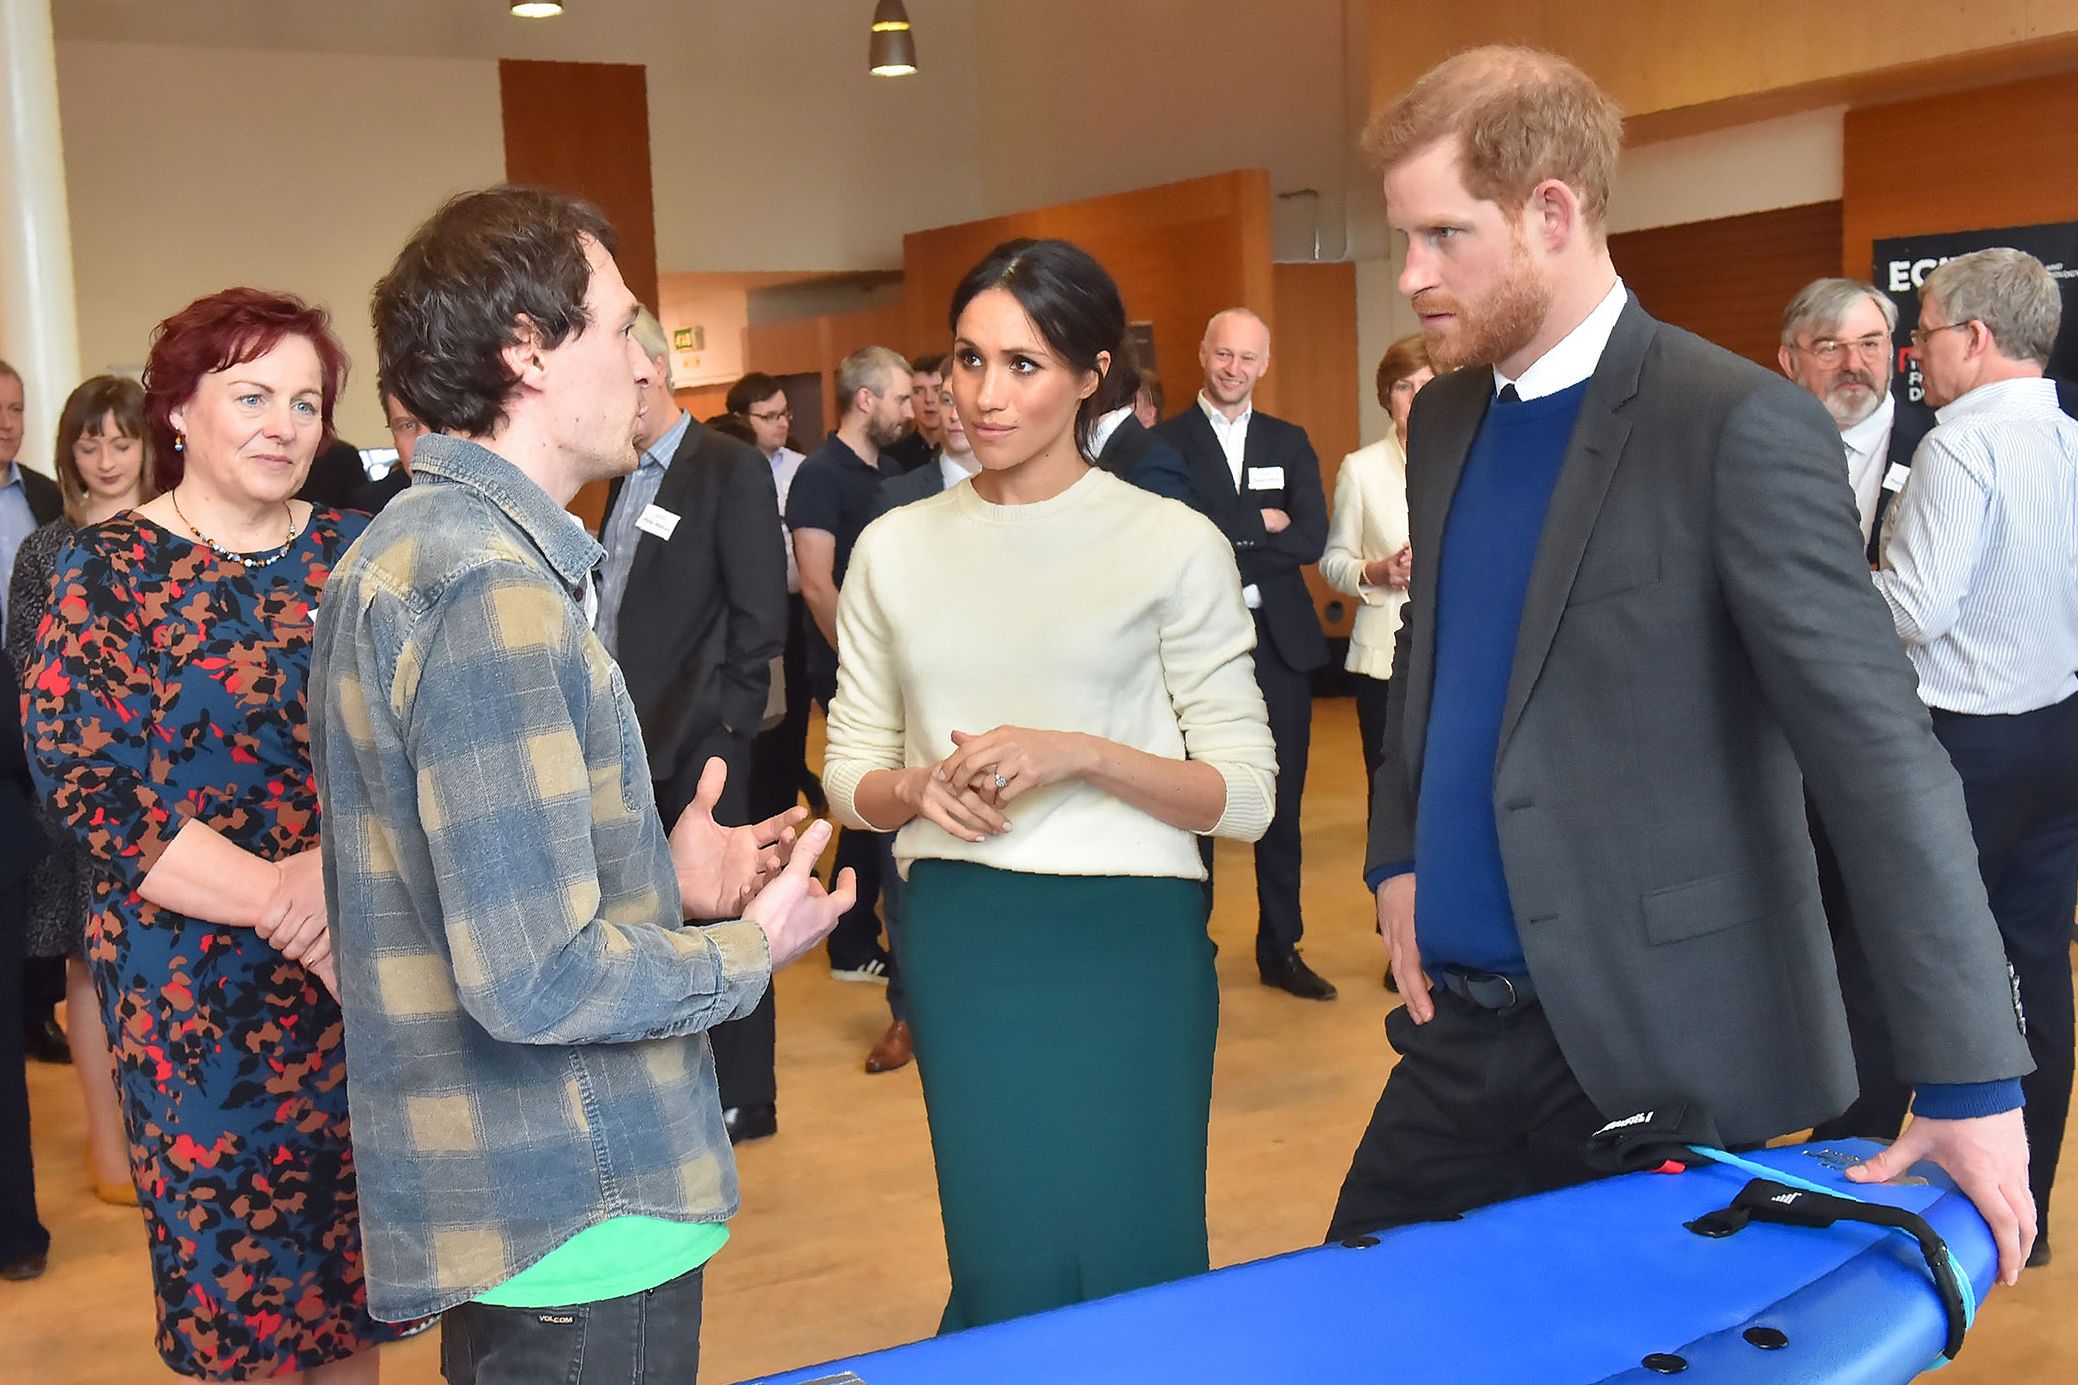 PHOTO: Britain's Prince Harry and his fiancee, U.S. actress Meghan Markle, speak with Chris Martin (2nd L), co-founder of Skunk Works during a visit to Northern Ireland's next generation science park, Catalyst Inc. in Belfast, Ireland, March 23, 2018.